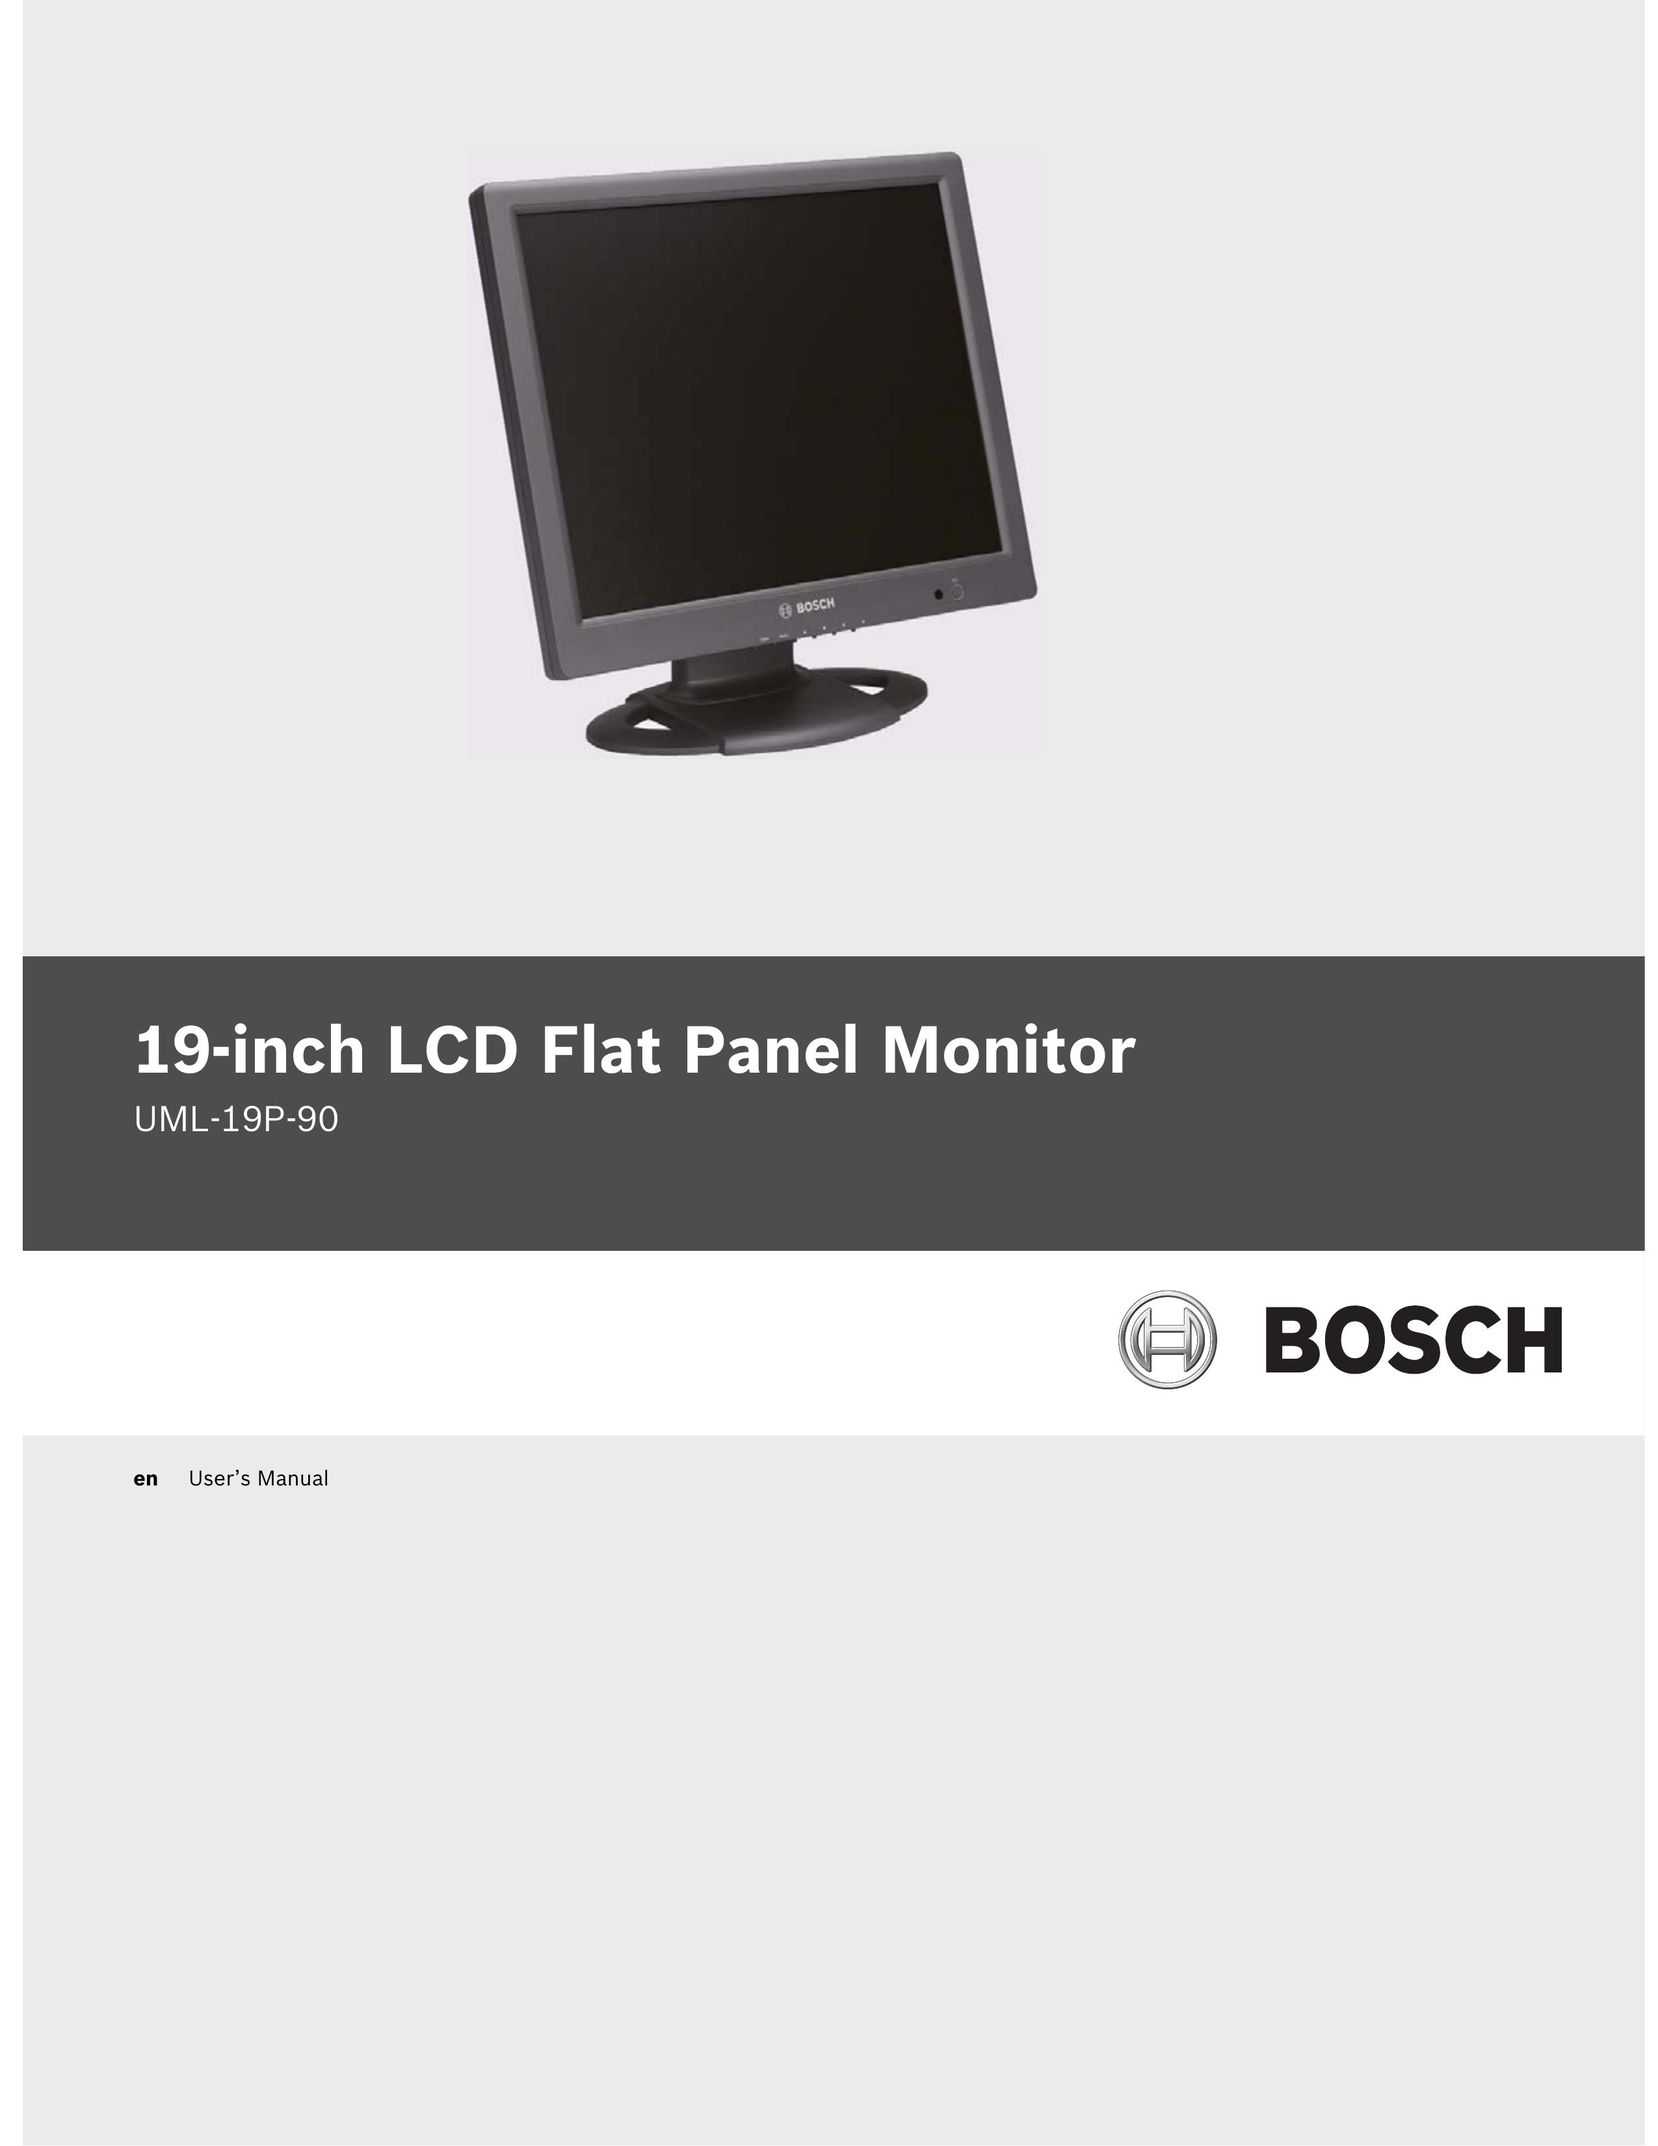 Bosch Appliances UML-19P-90 Computer Monitor User Manual (Page 1)